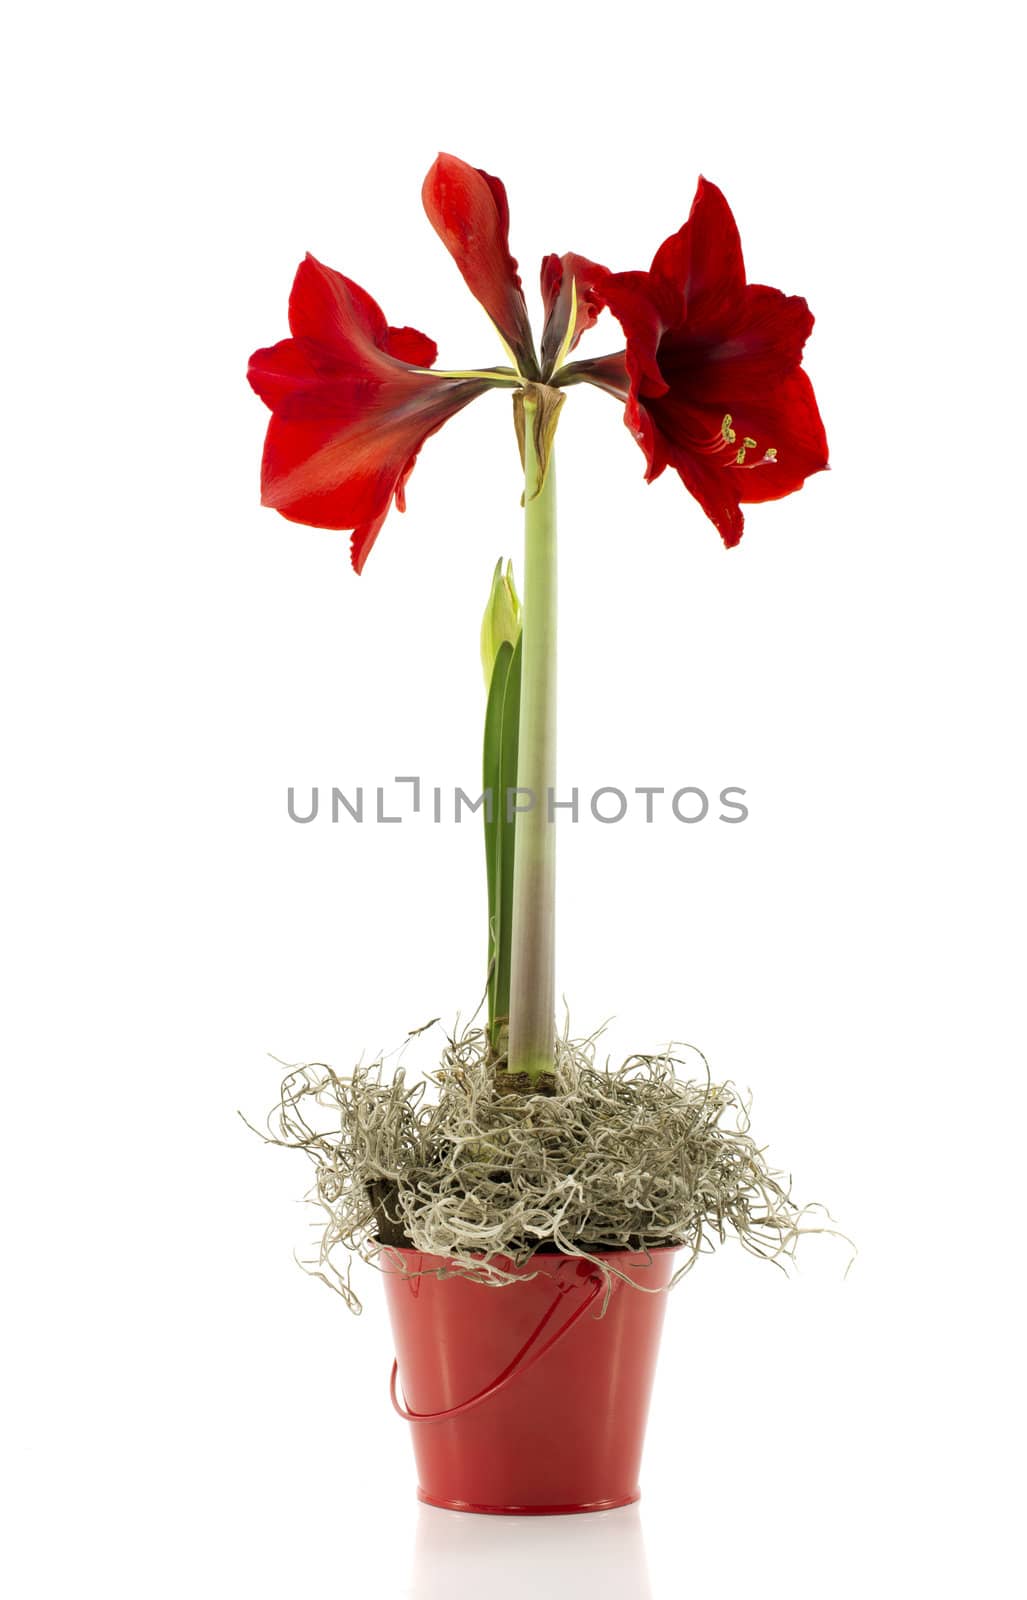 amaryllis red flower new life by compuinfoto